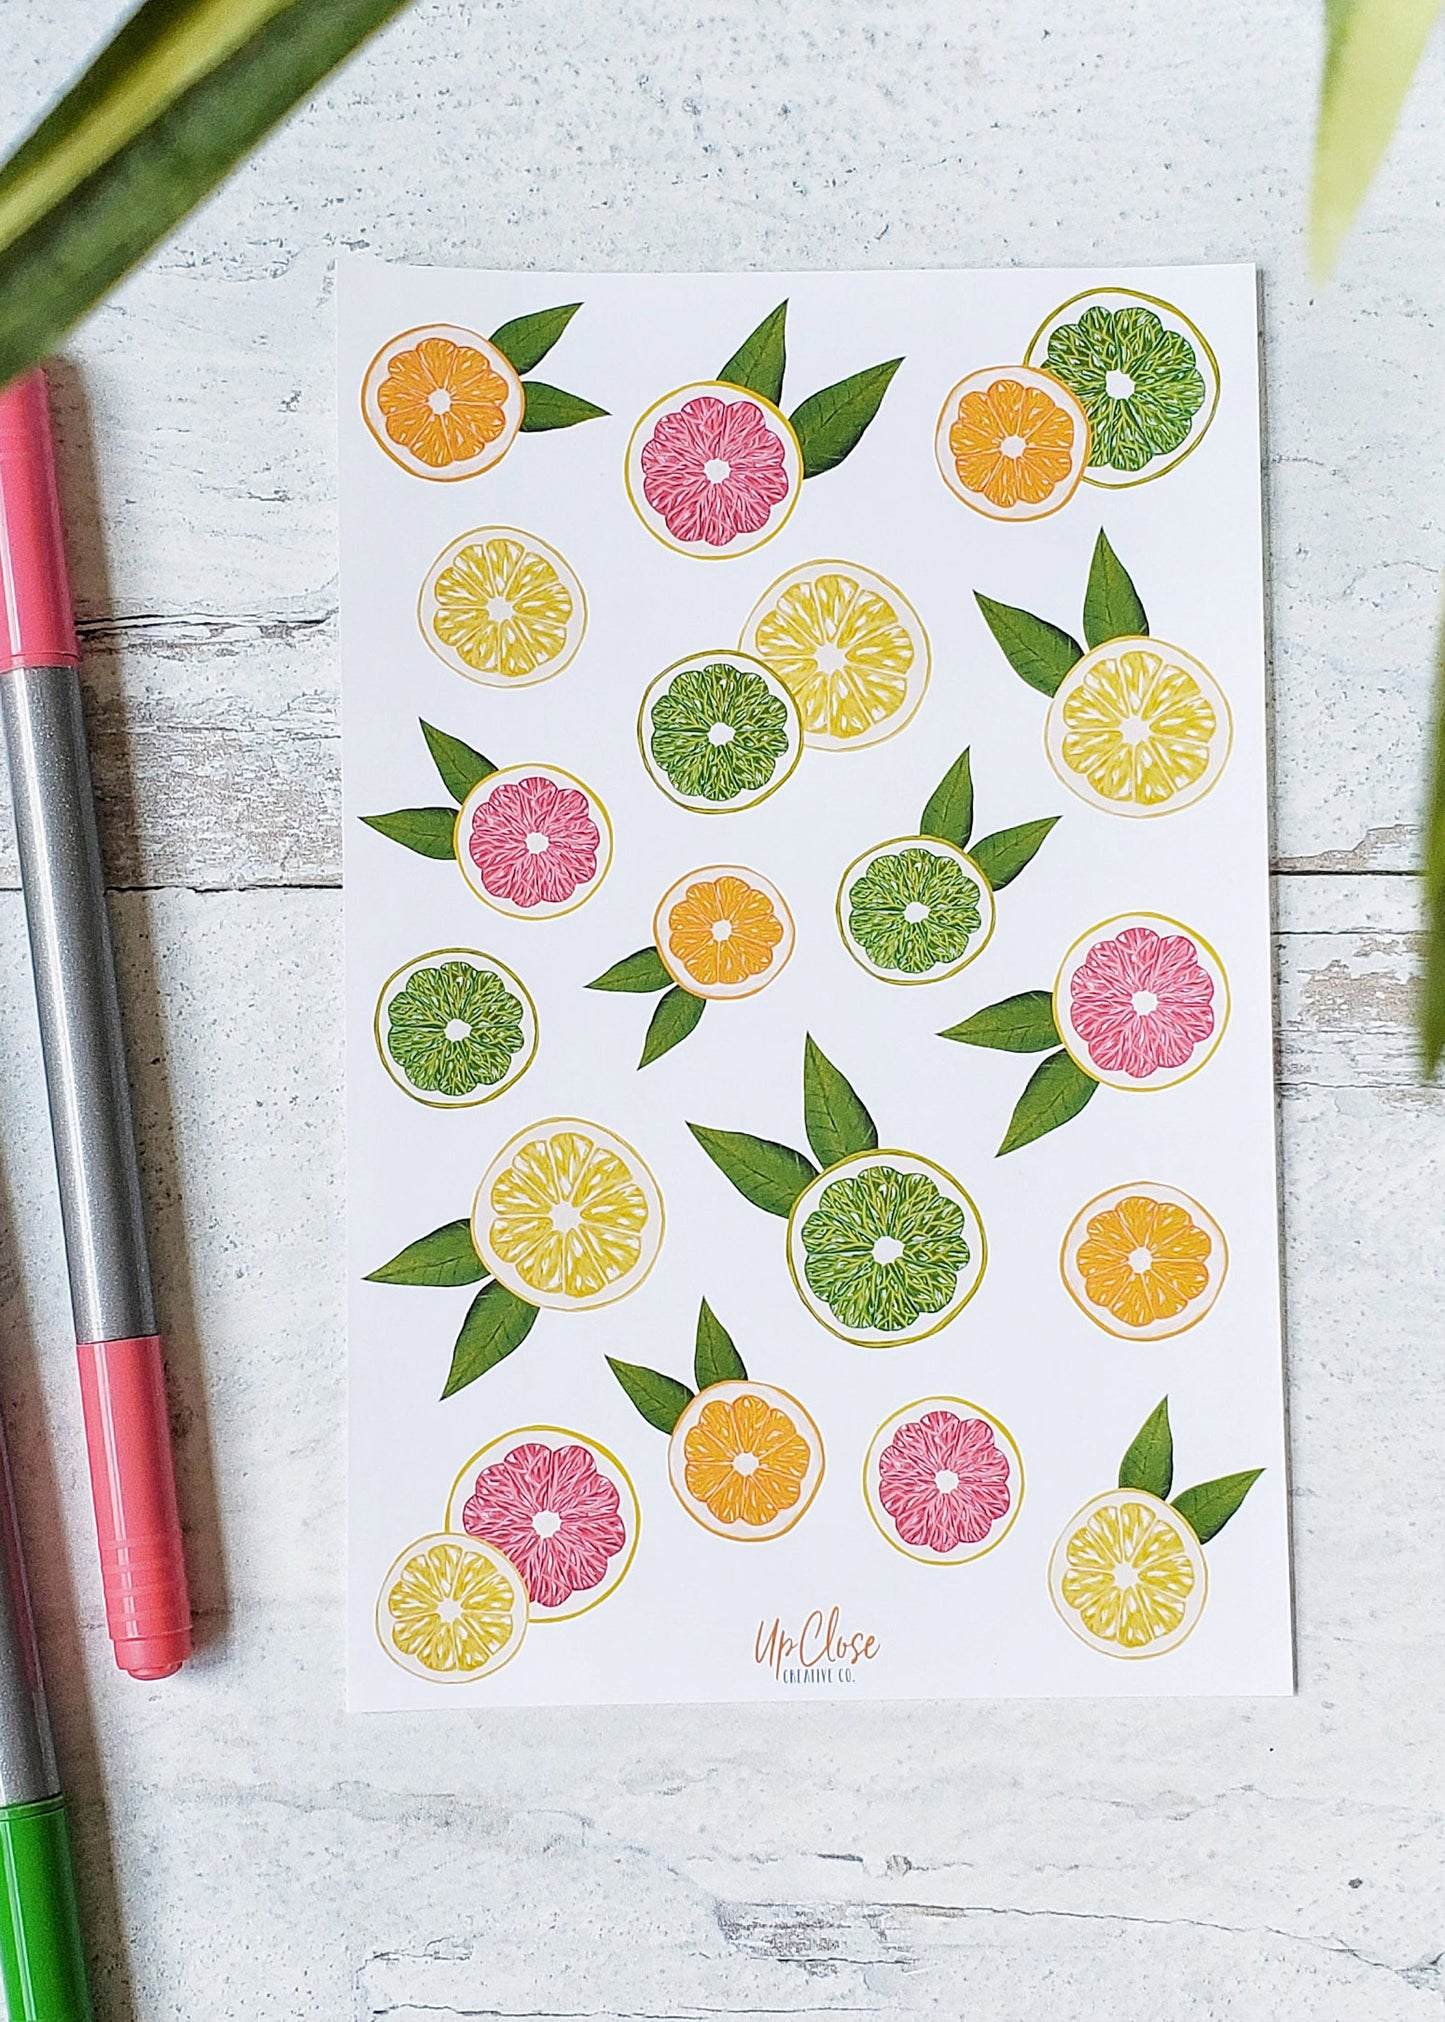 Sticker sheet with a variety of bright, colorful citrus fruits. Limes, lemons, oranges and pink grapefruits.